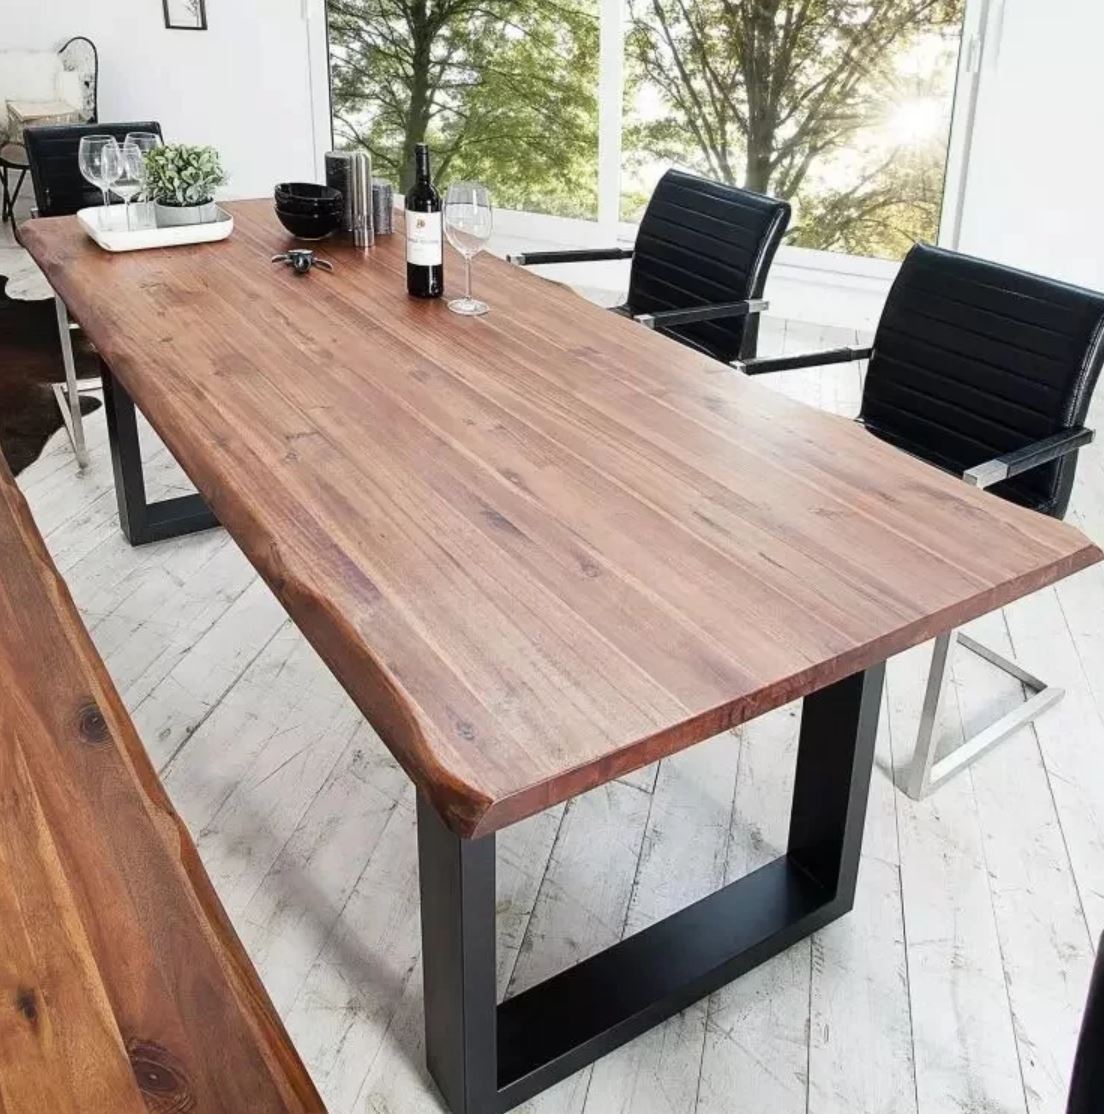 AUBREY Modern Industrial Solid Wood Dining Table  ( 4 Color Selection ) Special Price $499 - 899